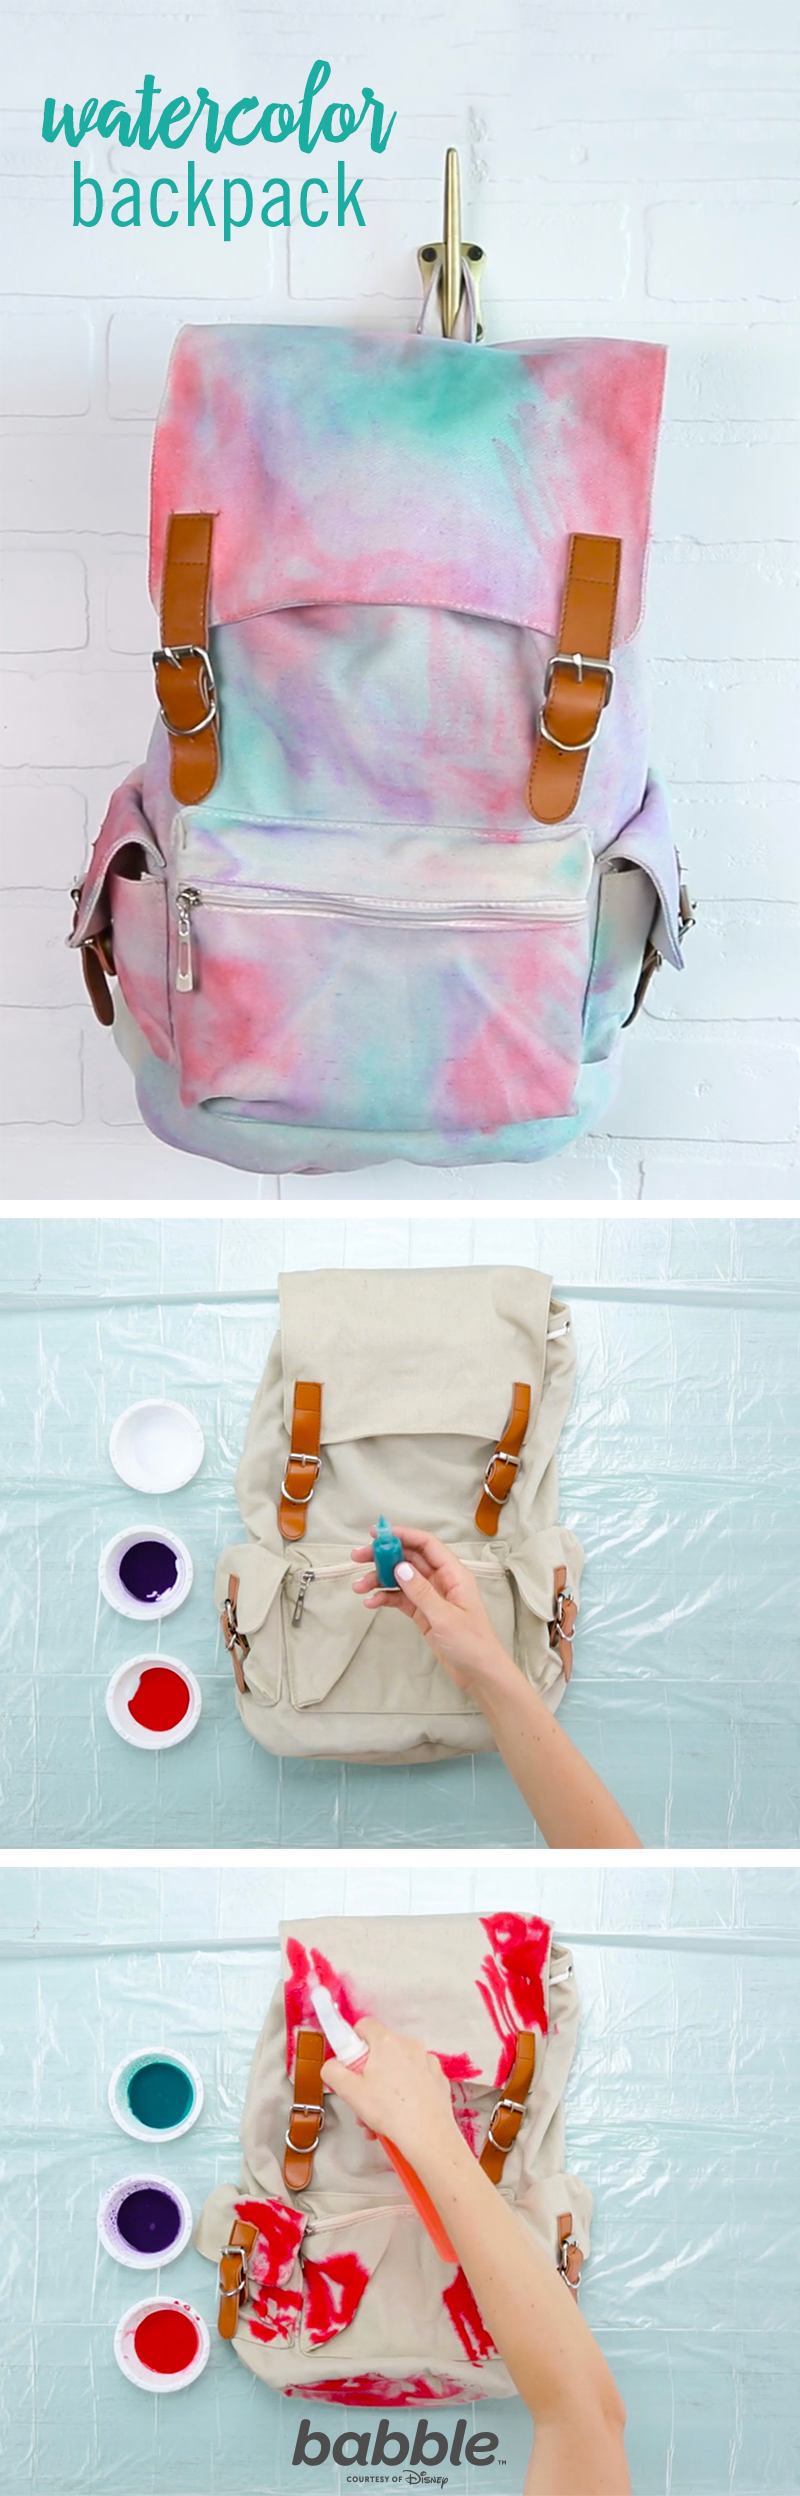 Add a pop of color to your kid’s next school bag with this DIY Watercolor Backpack. Grab some fabric dye, sponges, and a spray